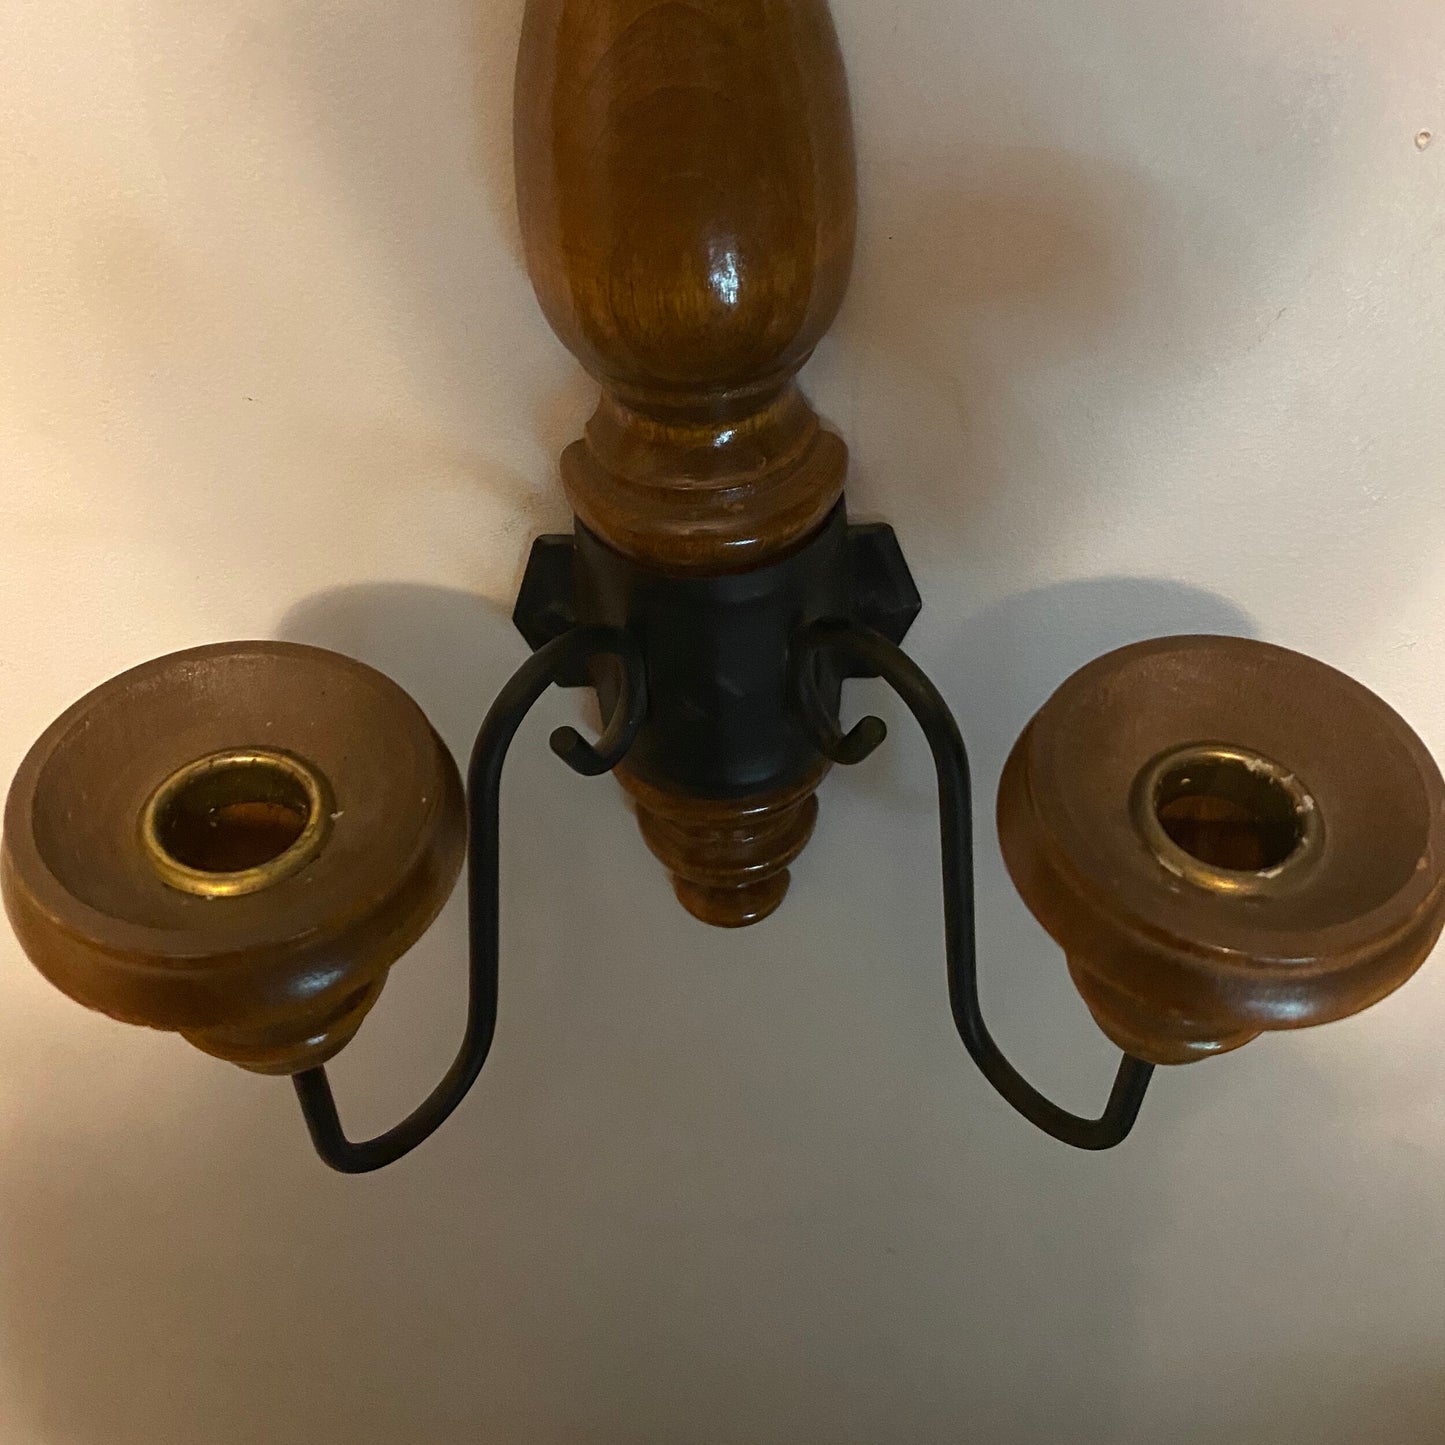 Vintage Tall Wood & Metal Wall Candleholder Sconce